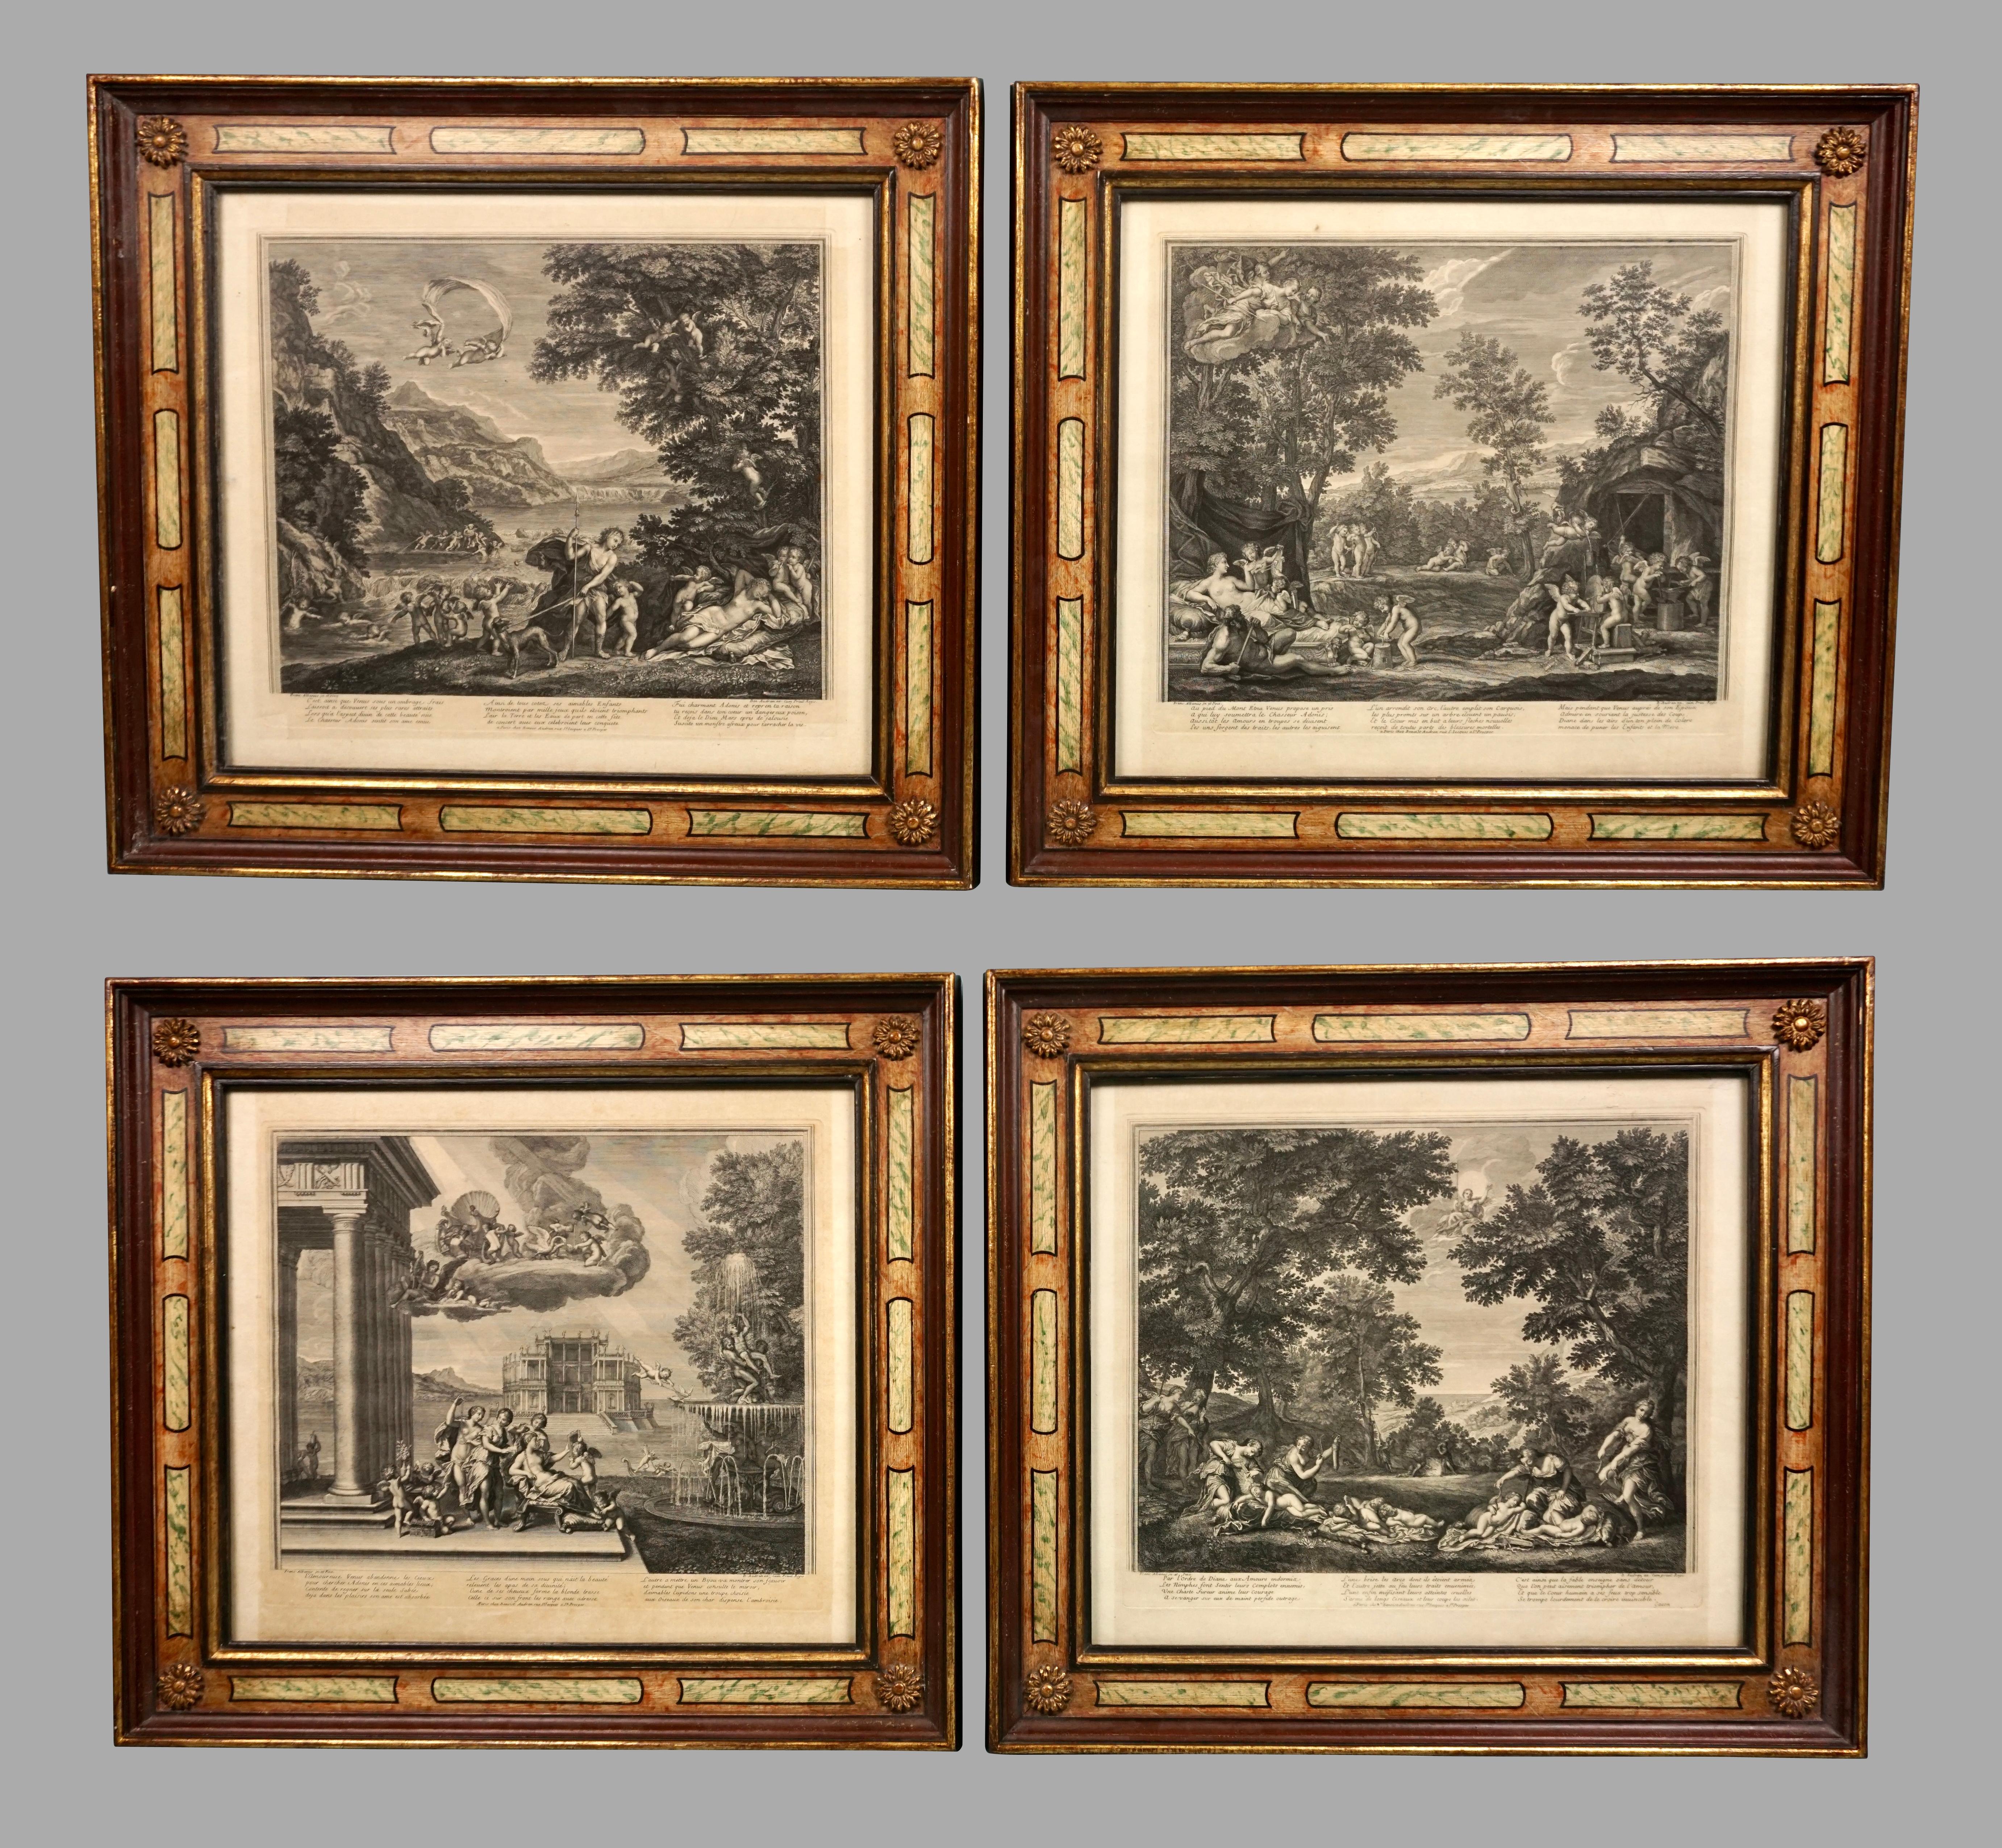 A grouping of 4 Continental early 18th century etchings and engravings on laid paper after Francesco Albani (Italian 1578-1660) engraved by Benoit Audran the Elder (French 1661-1721), circa 1700. These highly detailed etchings from the series 